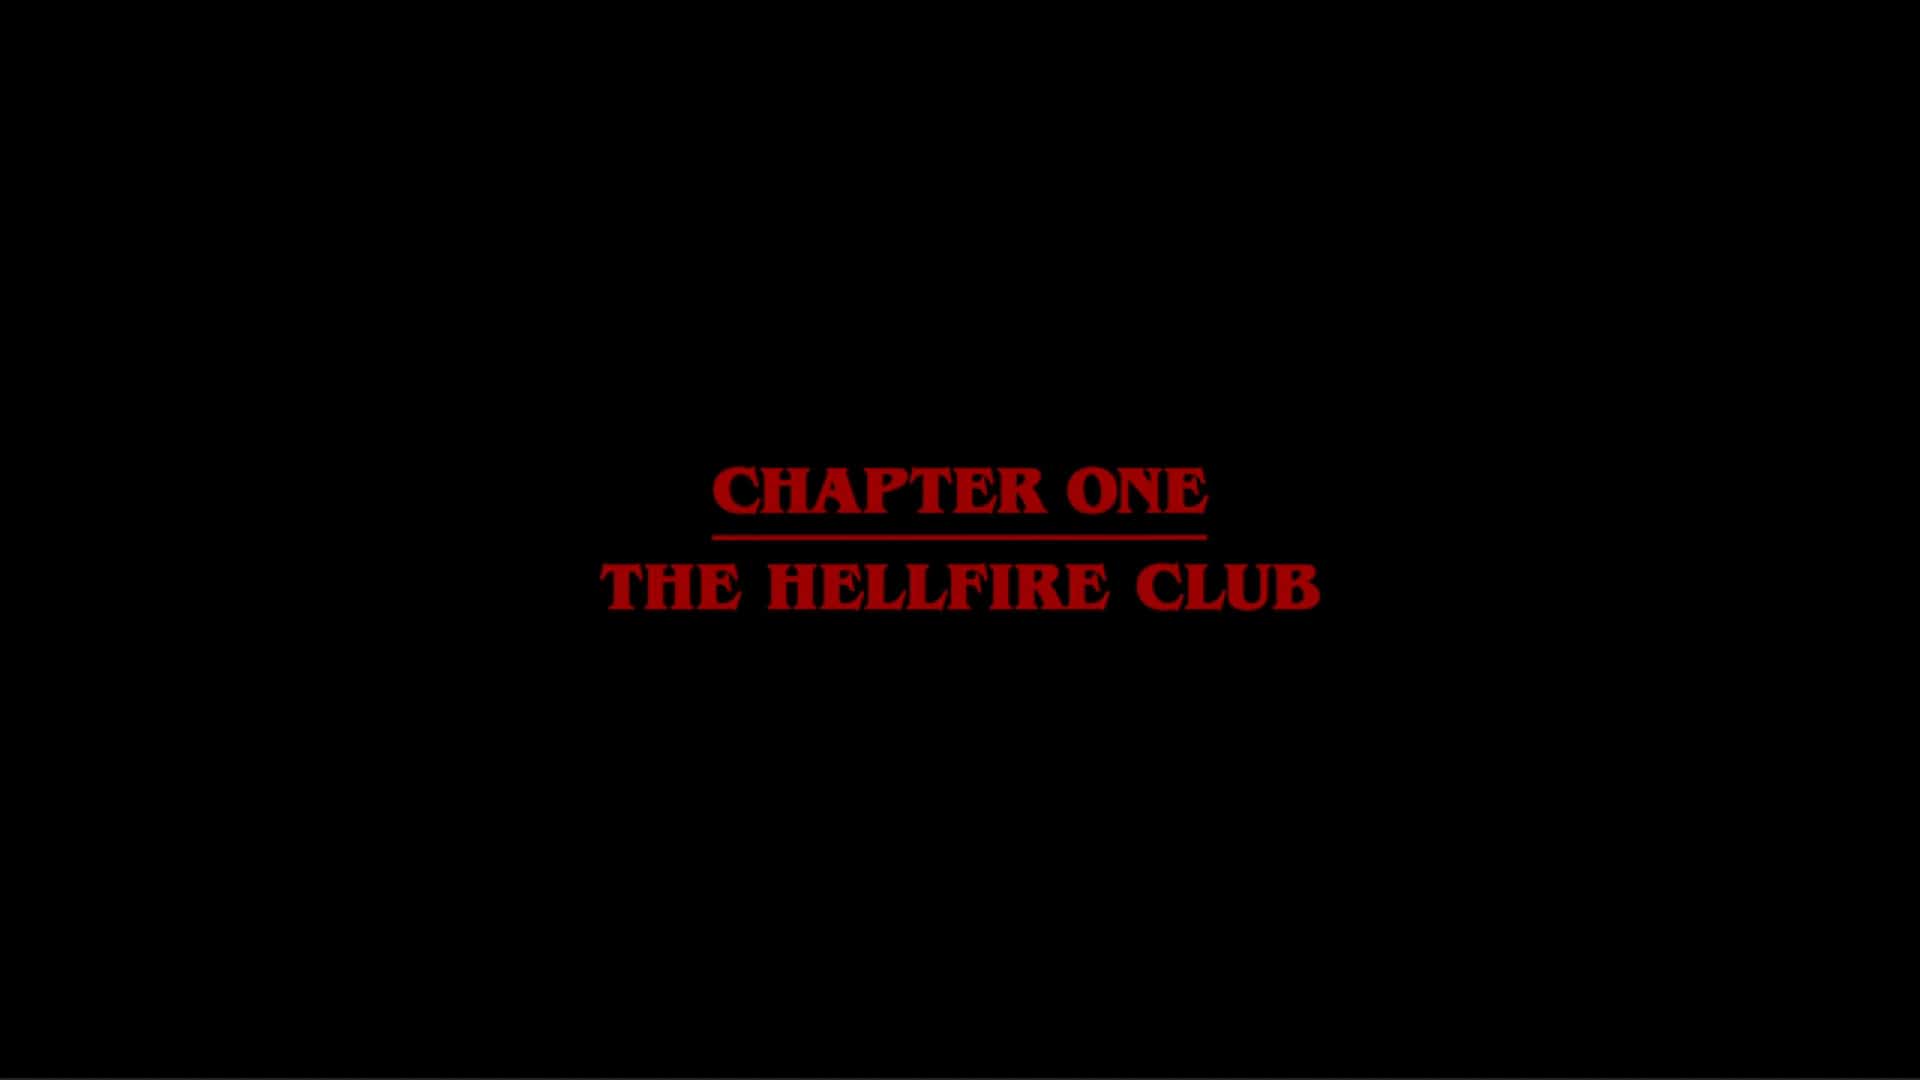 Title Card - Stranger Things Season 4 Episode 1 “Chapter One The Hellfire Club”